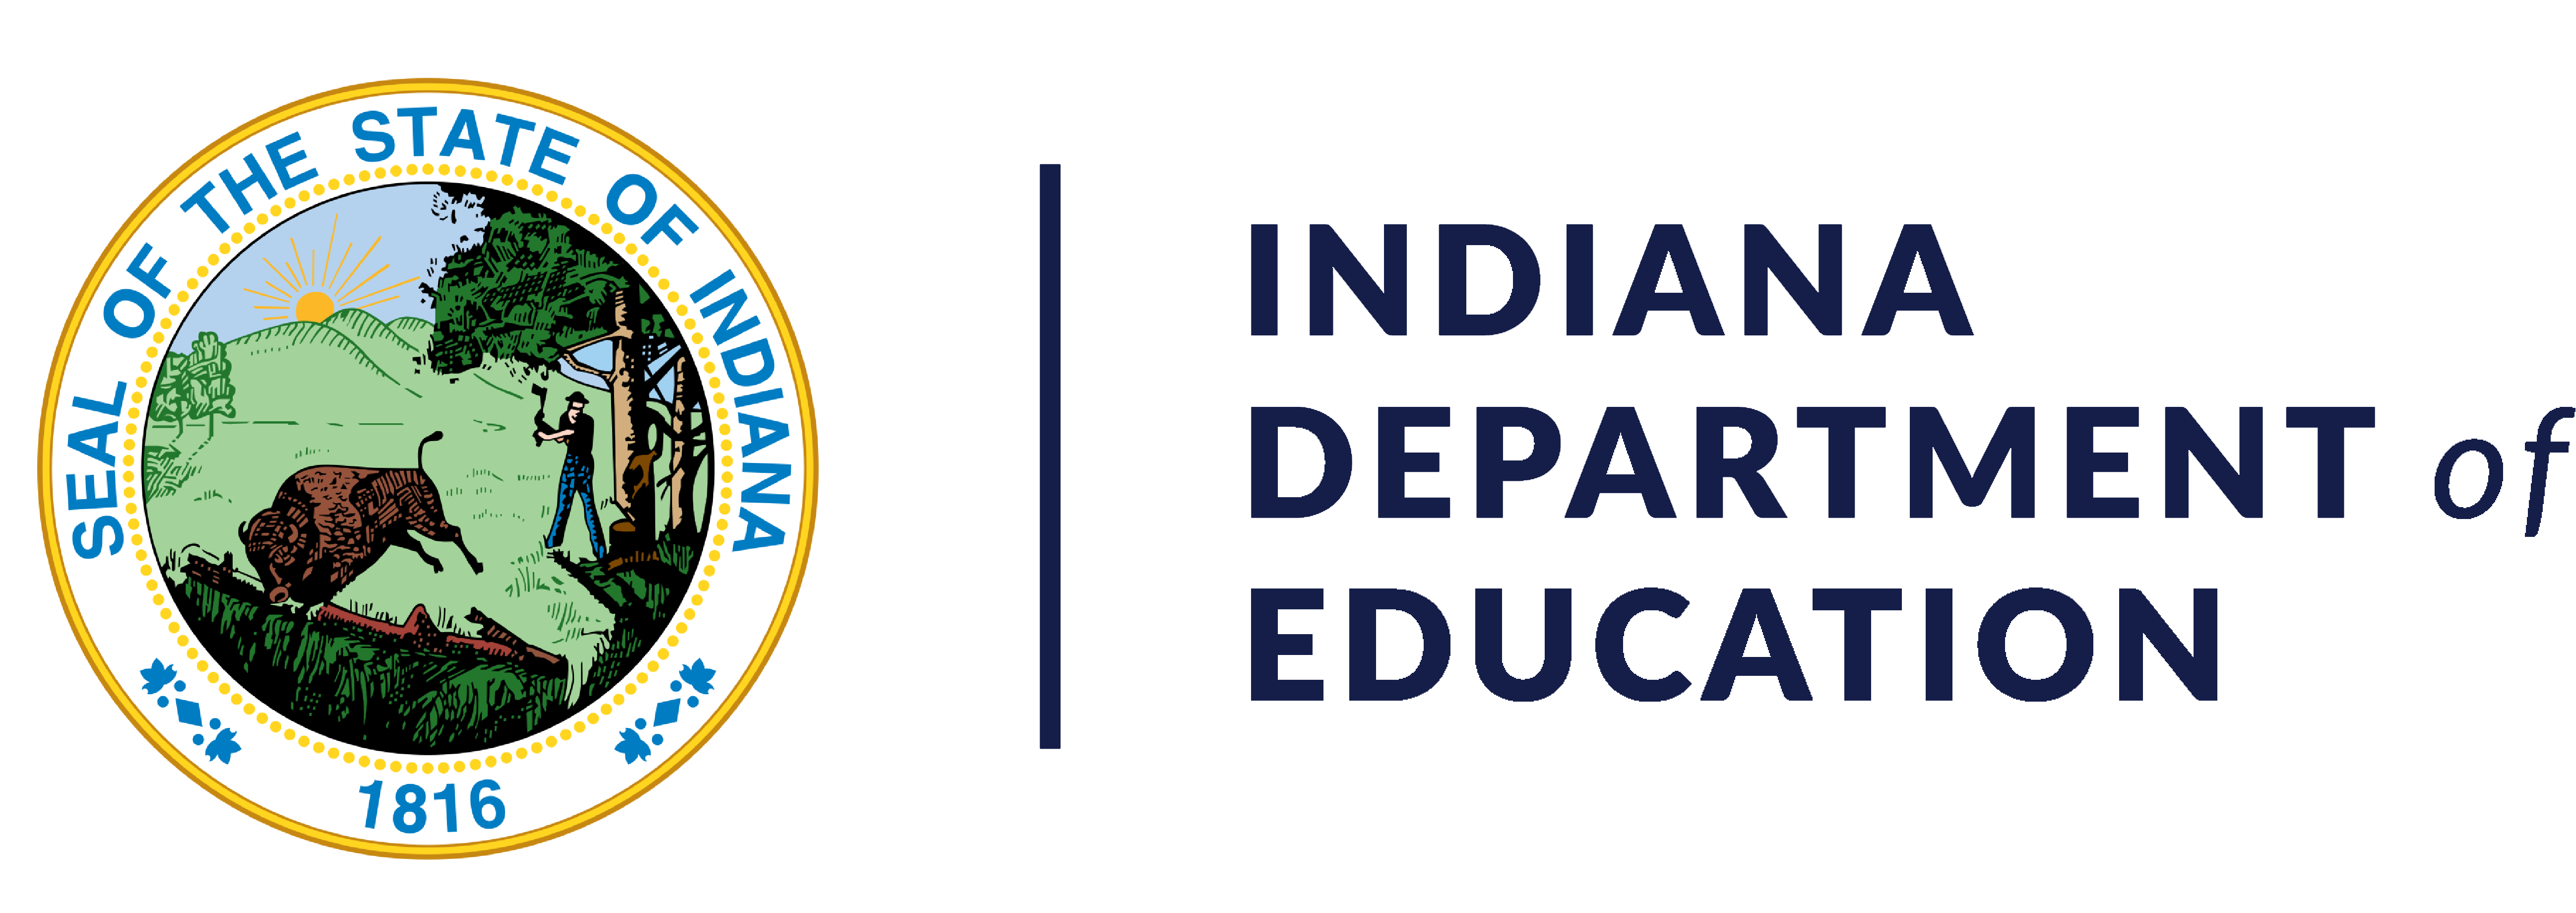 Indiana Department of Education 